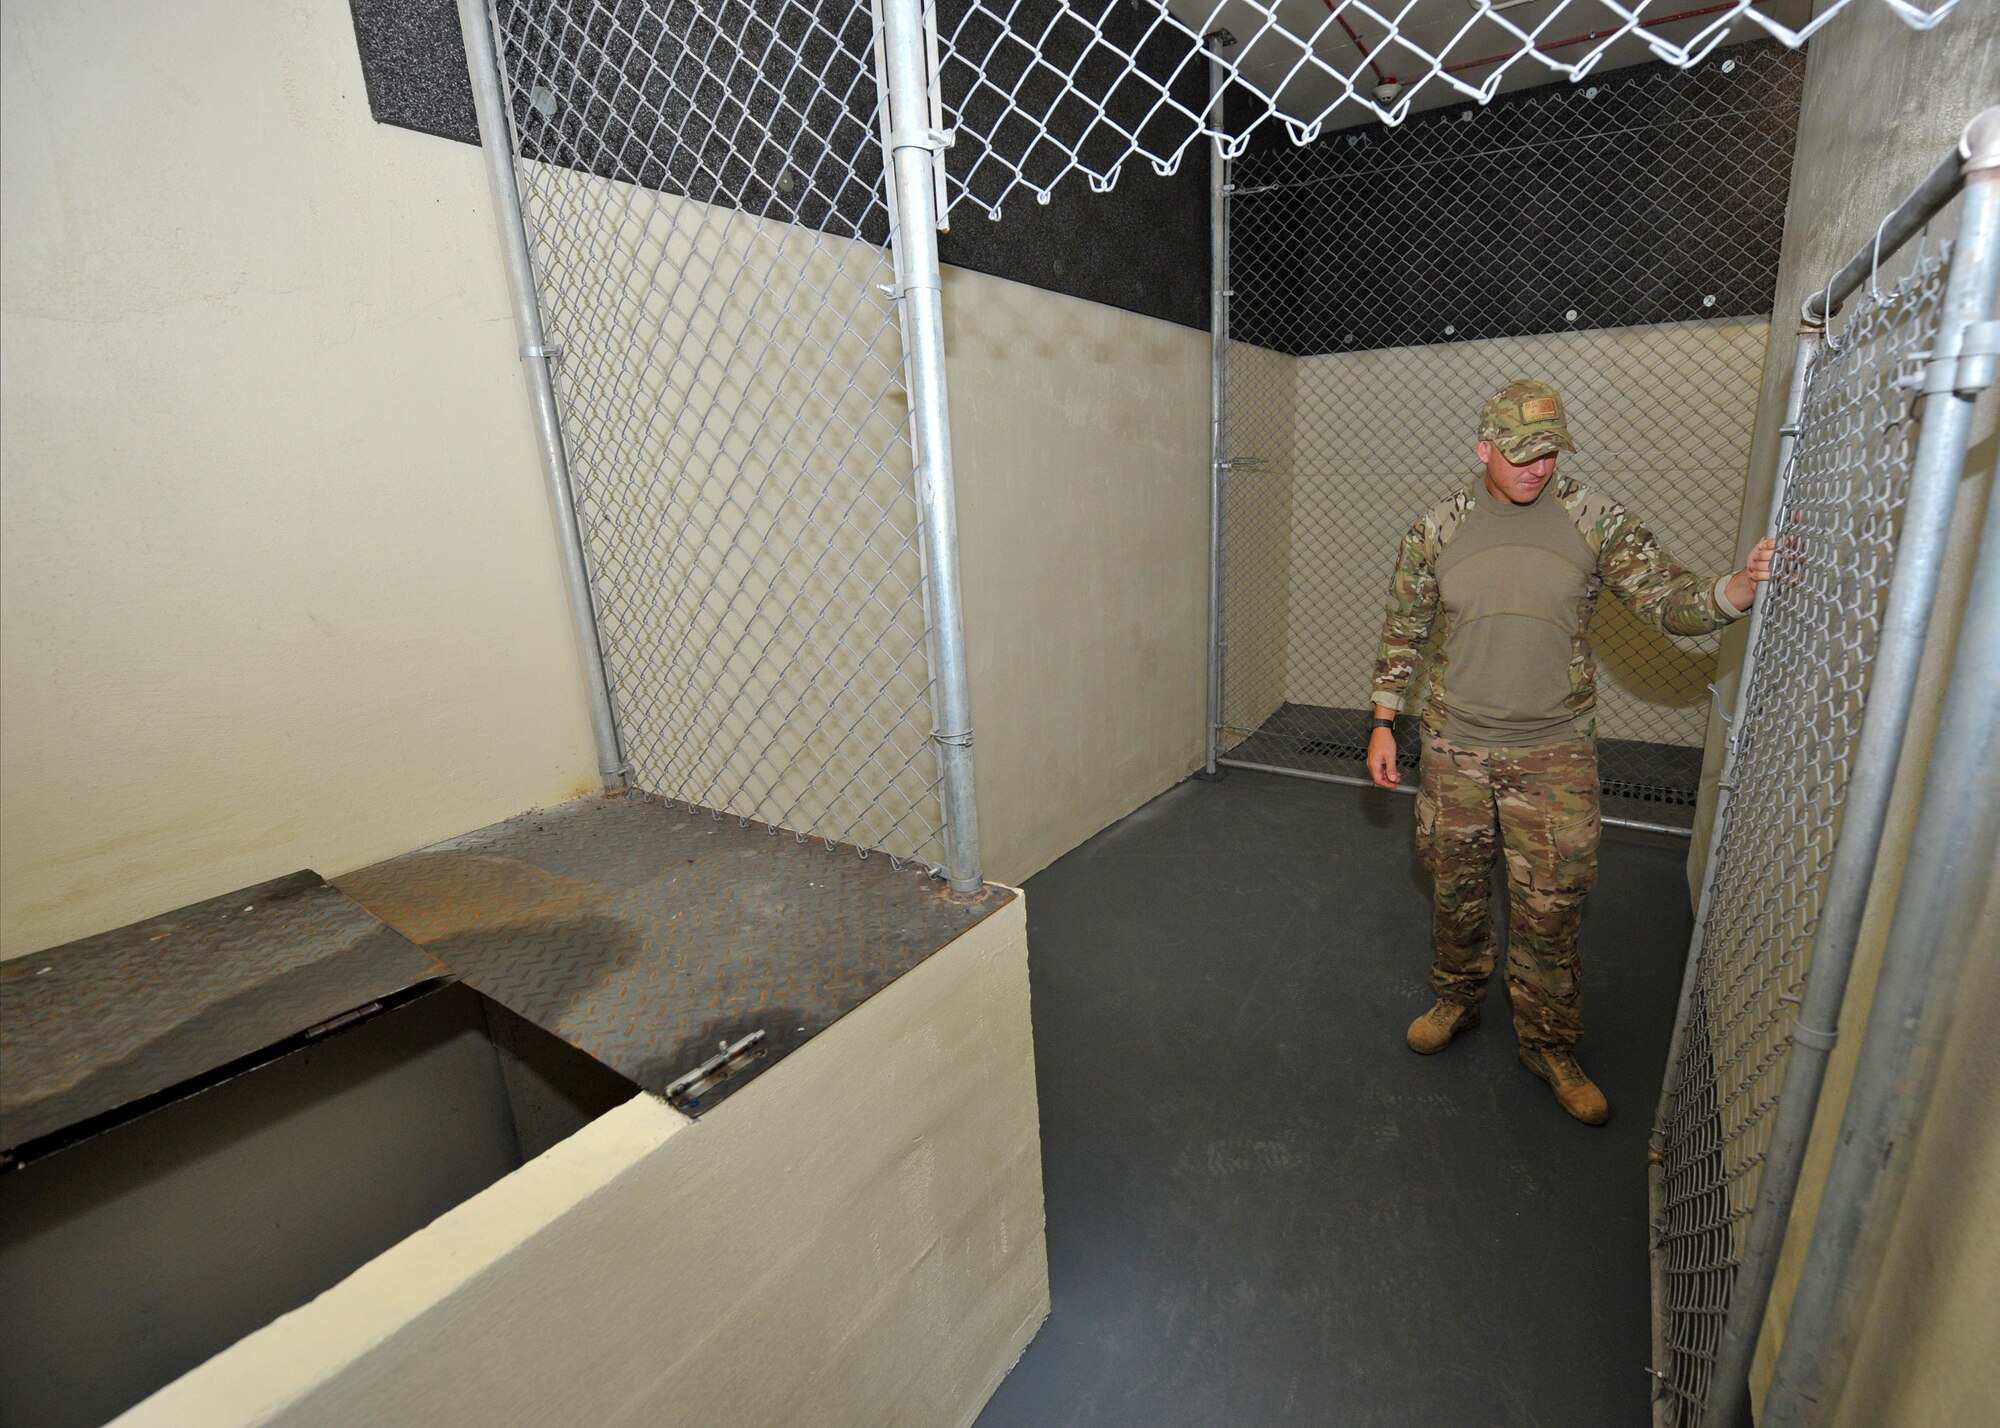 Royal Australian Air Force Leading Aircraftman Kevin Martins, Combat Support Unit 14 military working dog handler and trainer attached to the 380th Expeditionary Security Forces Squadron MWD Section, inspects a kennel in the newly constructed K9 compound at an undisclosed location in Southwest Asia, Jan. 26, 2016. The kennels are approximately 160 percent larger than those previous utilized and include a house for military working dogs to rest and relax. (U.S. Air Force photo by Staff Sgt. Kentavist P. Brackin/released)